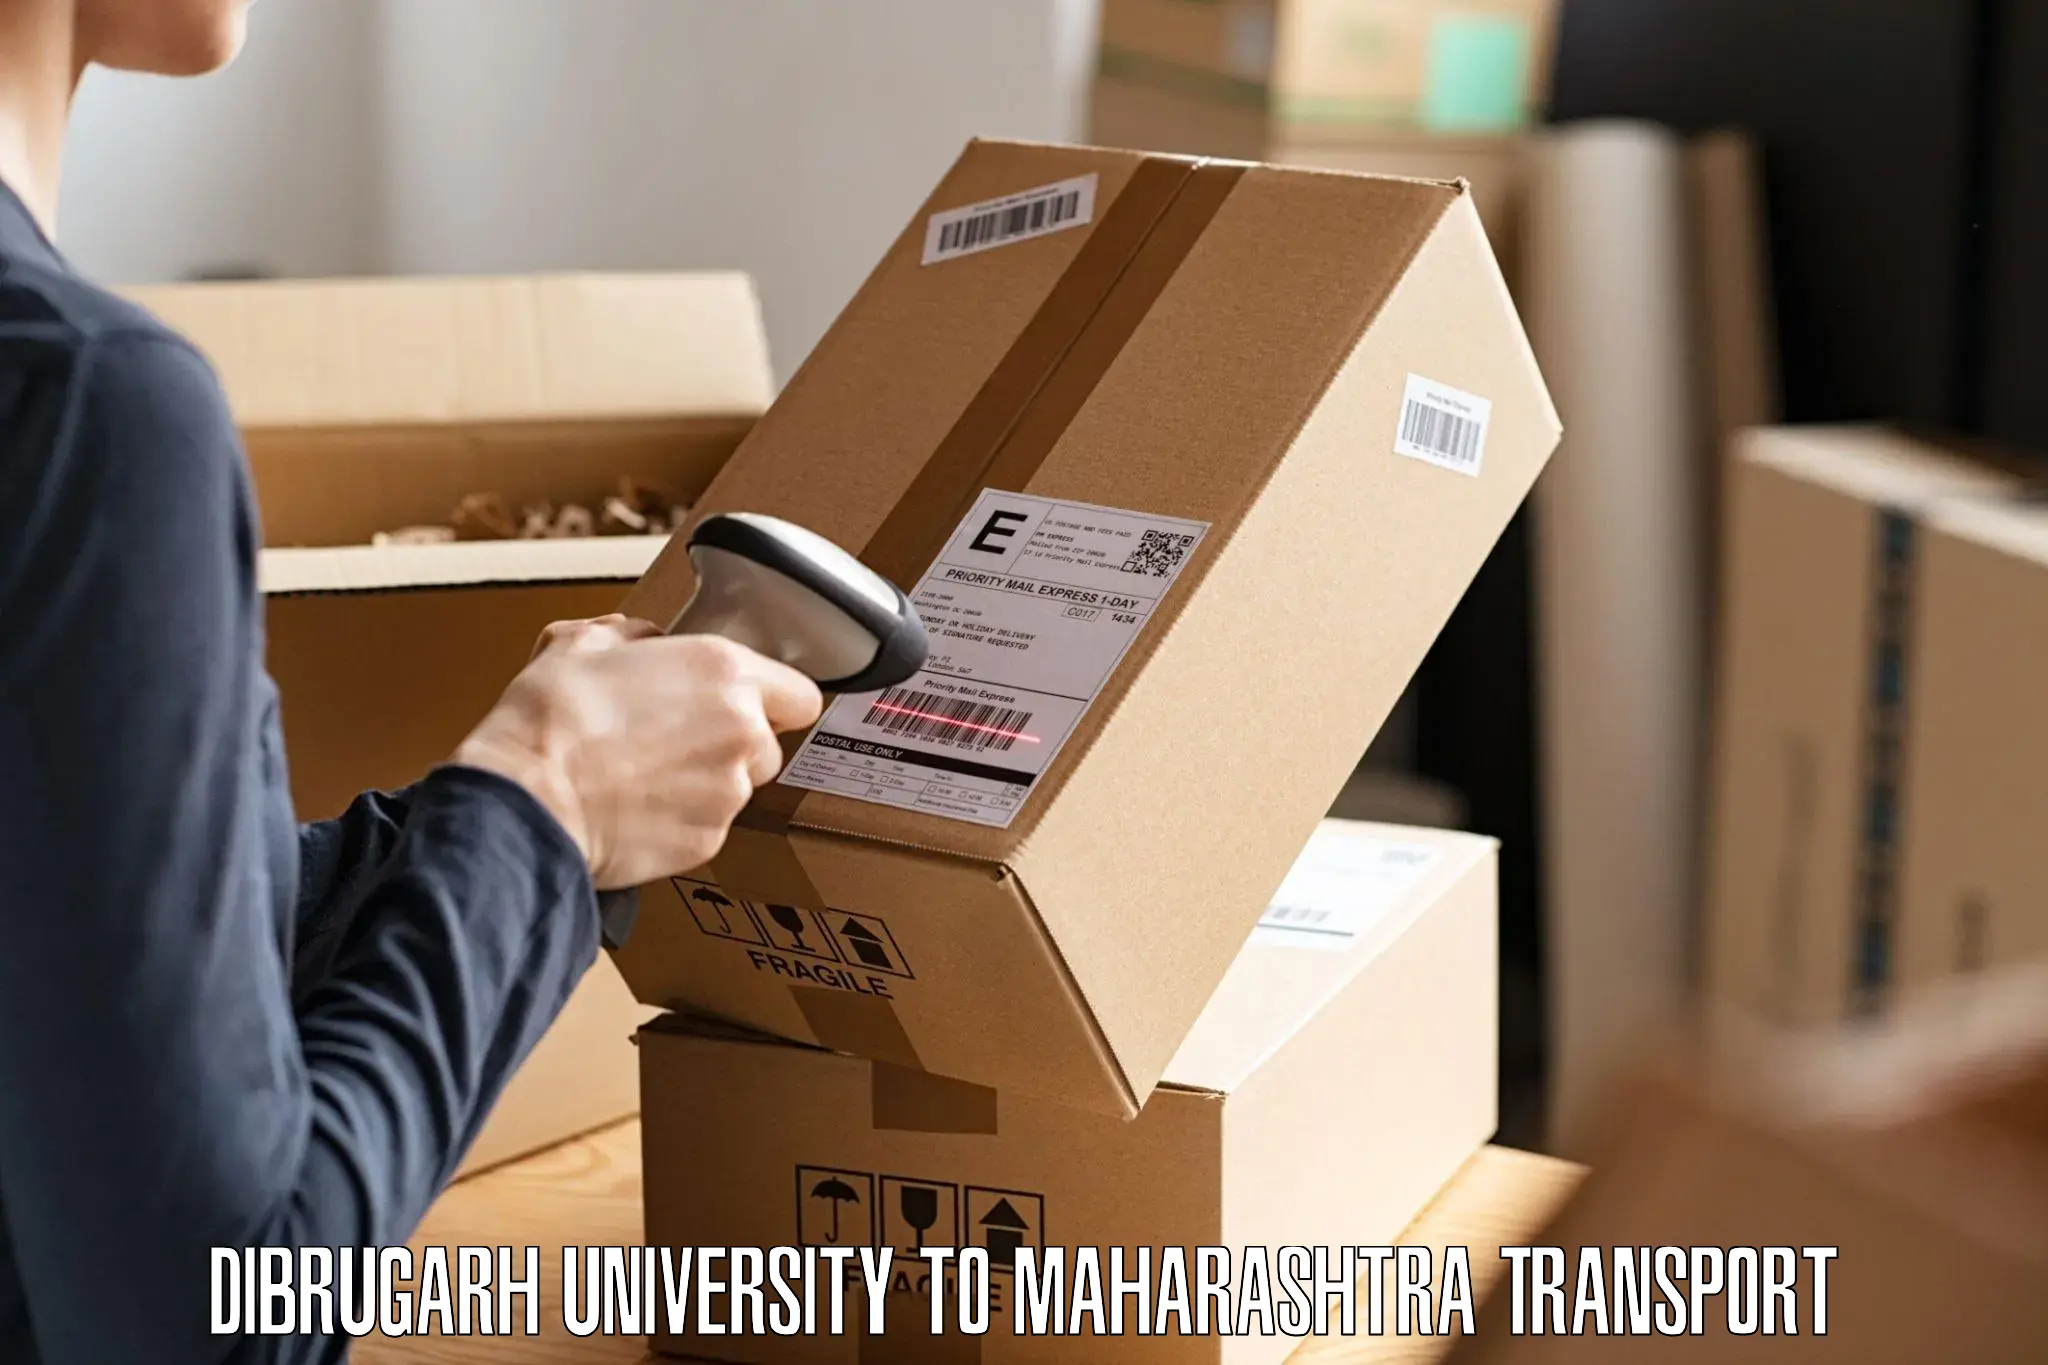 Road transport online services Dibrugarh University to Lonikand